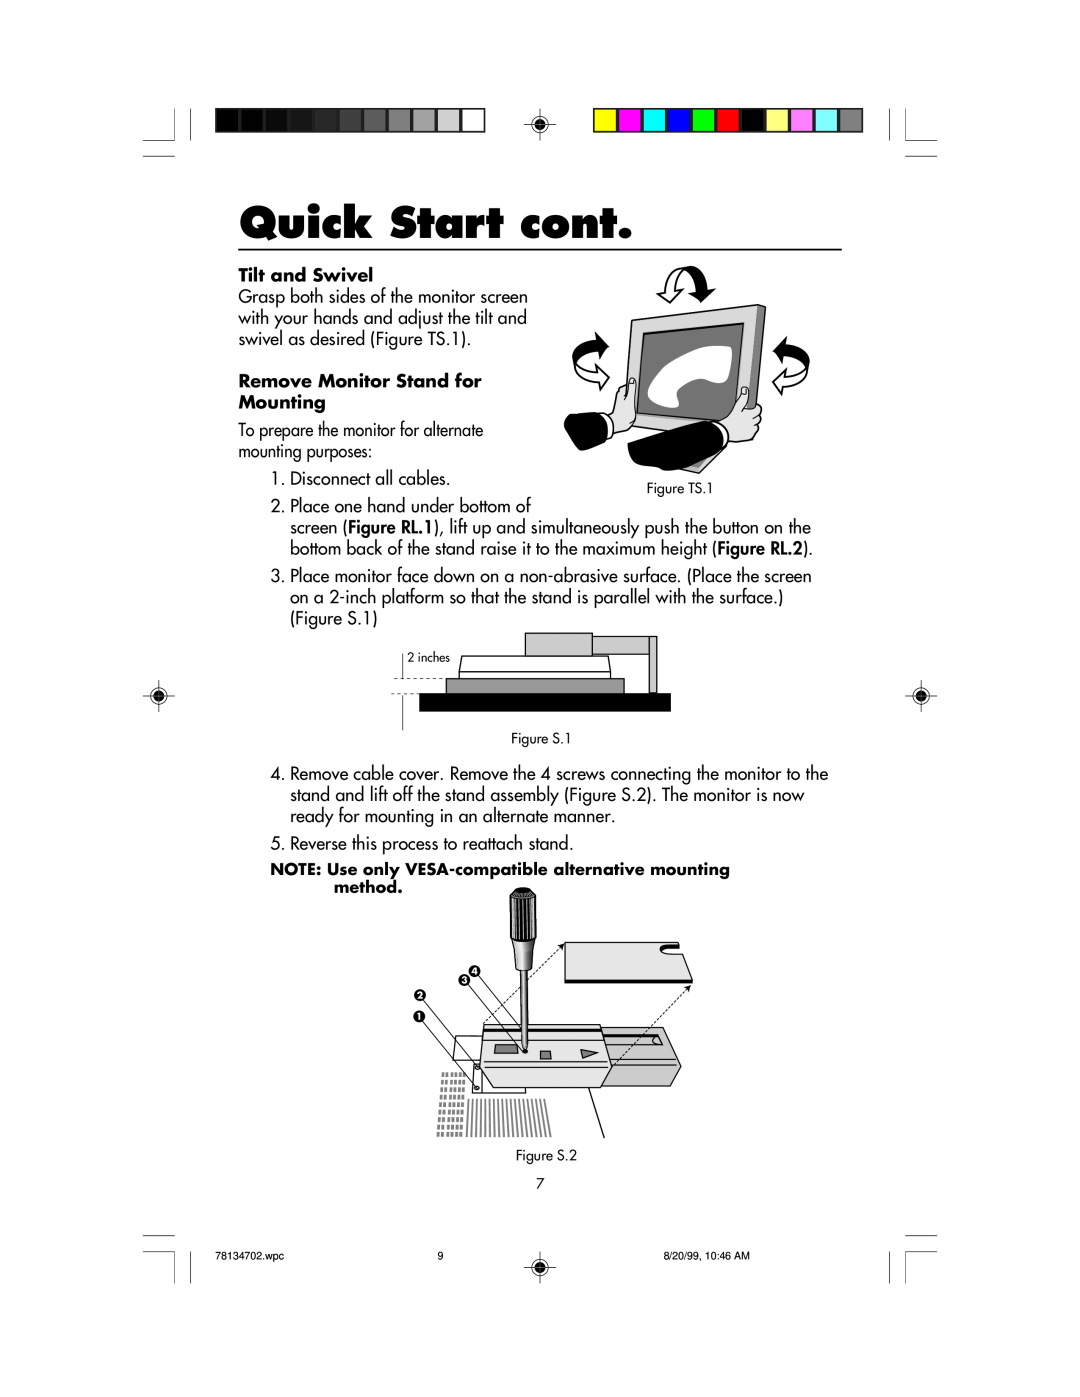 NEC LCD1510+ user manual Quick Start cont, Tilt and Swivel, Remove Monitor Stand for Mounting 